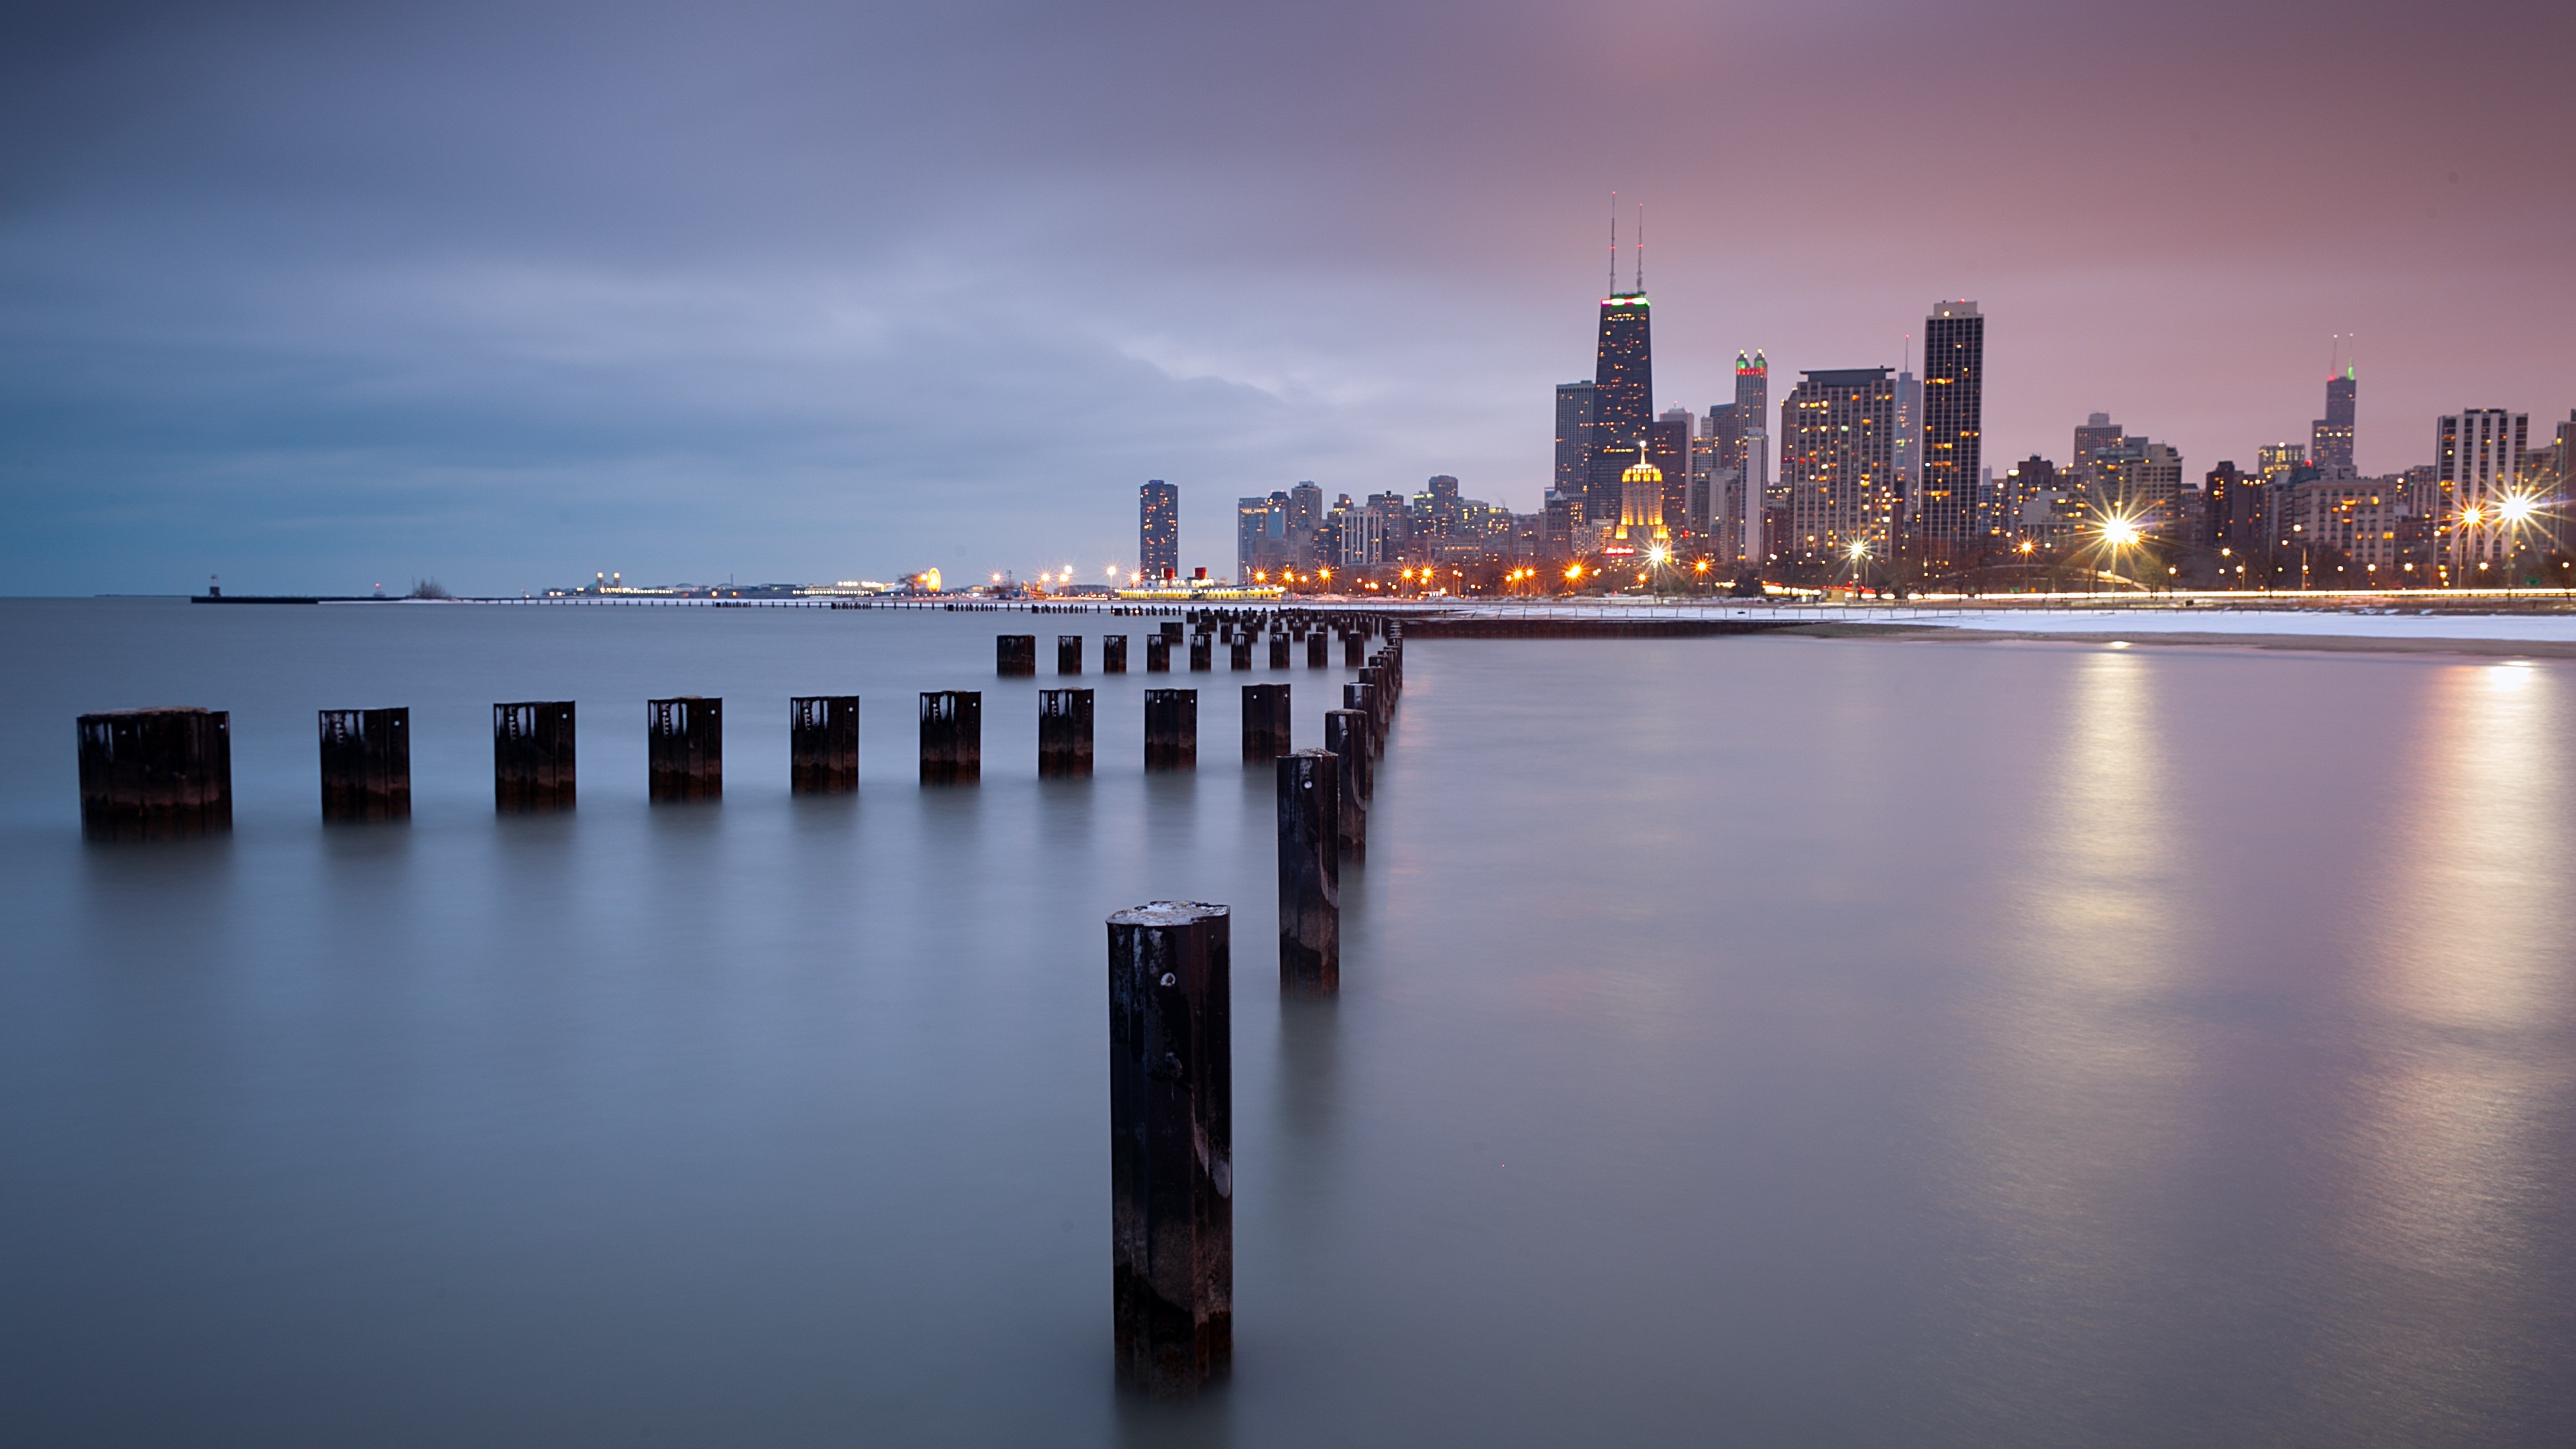 Chicago 4K HD Wallpapers  HD Wallpapers  ID 32777